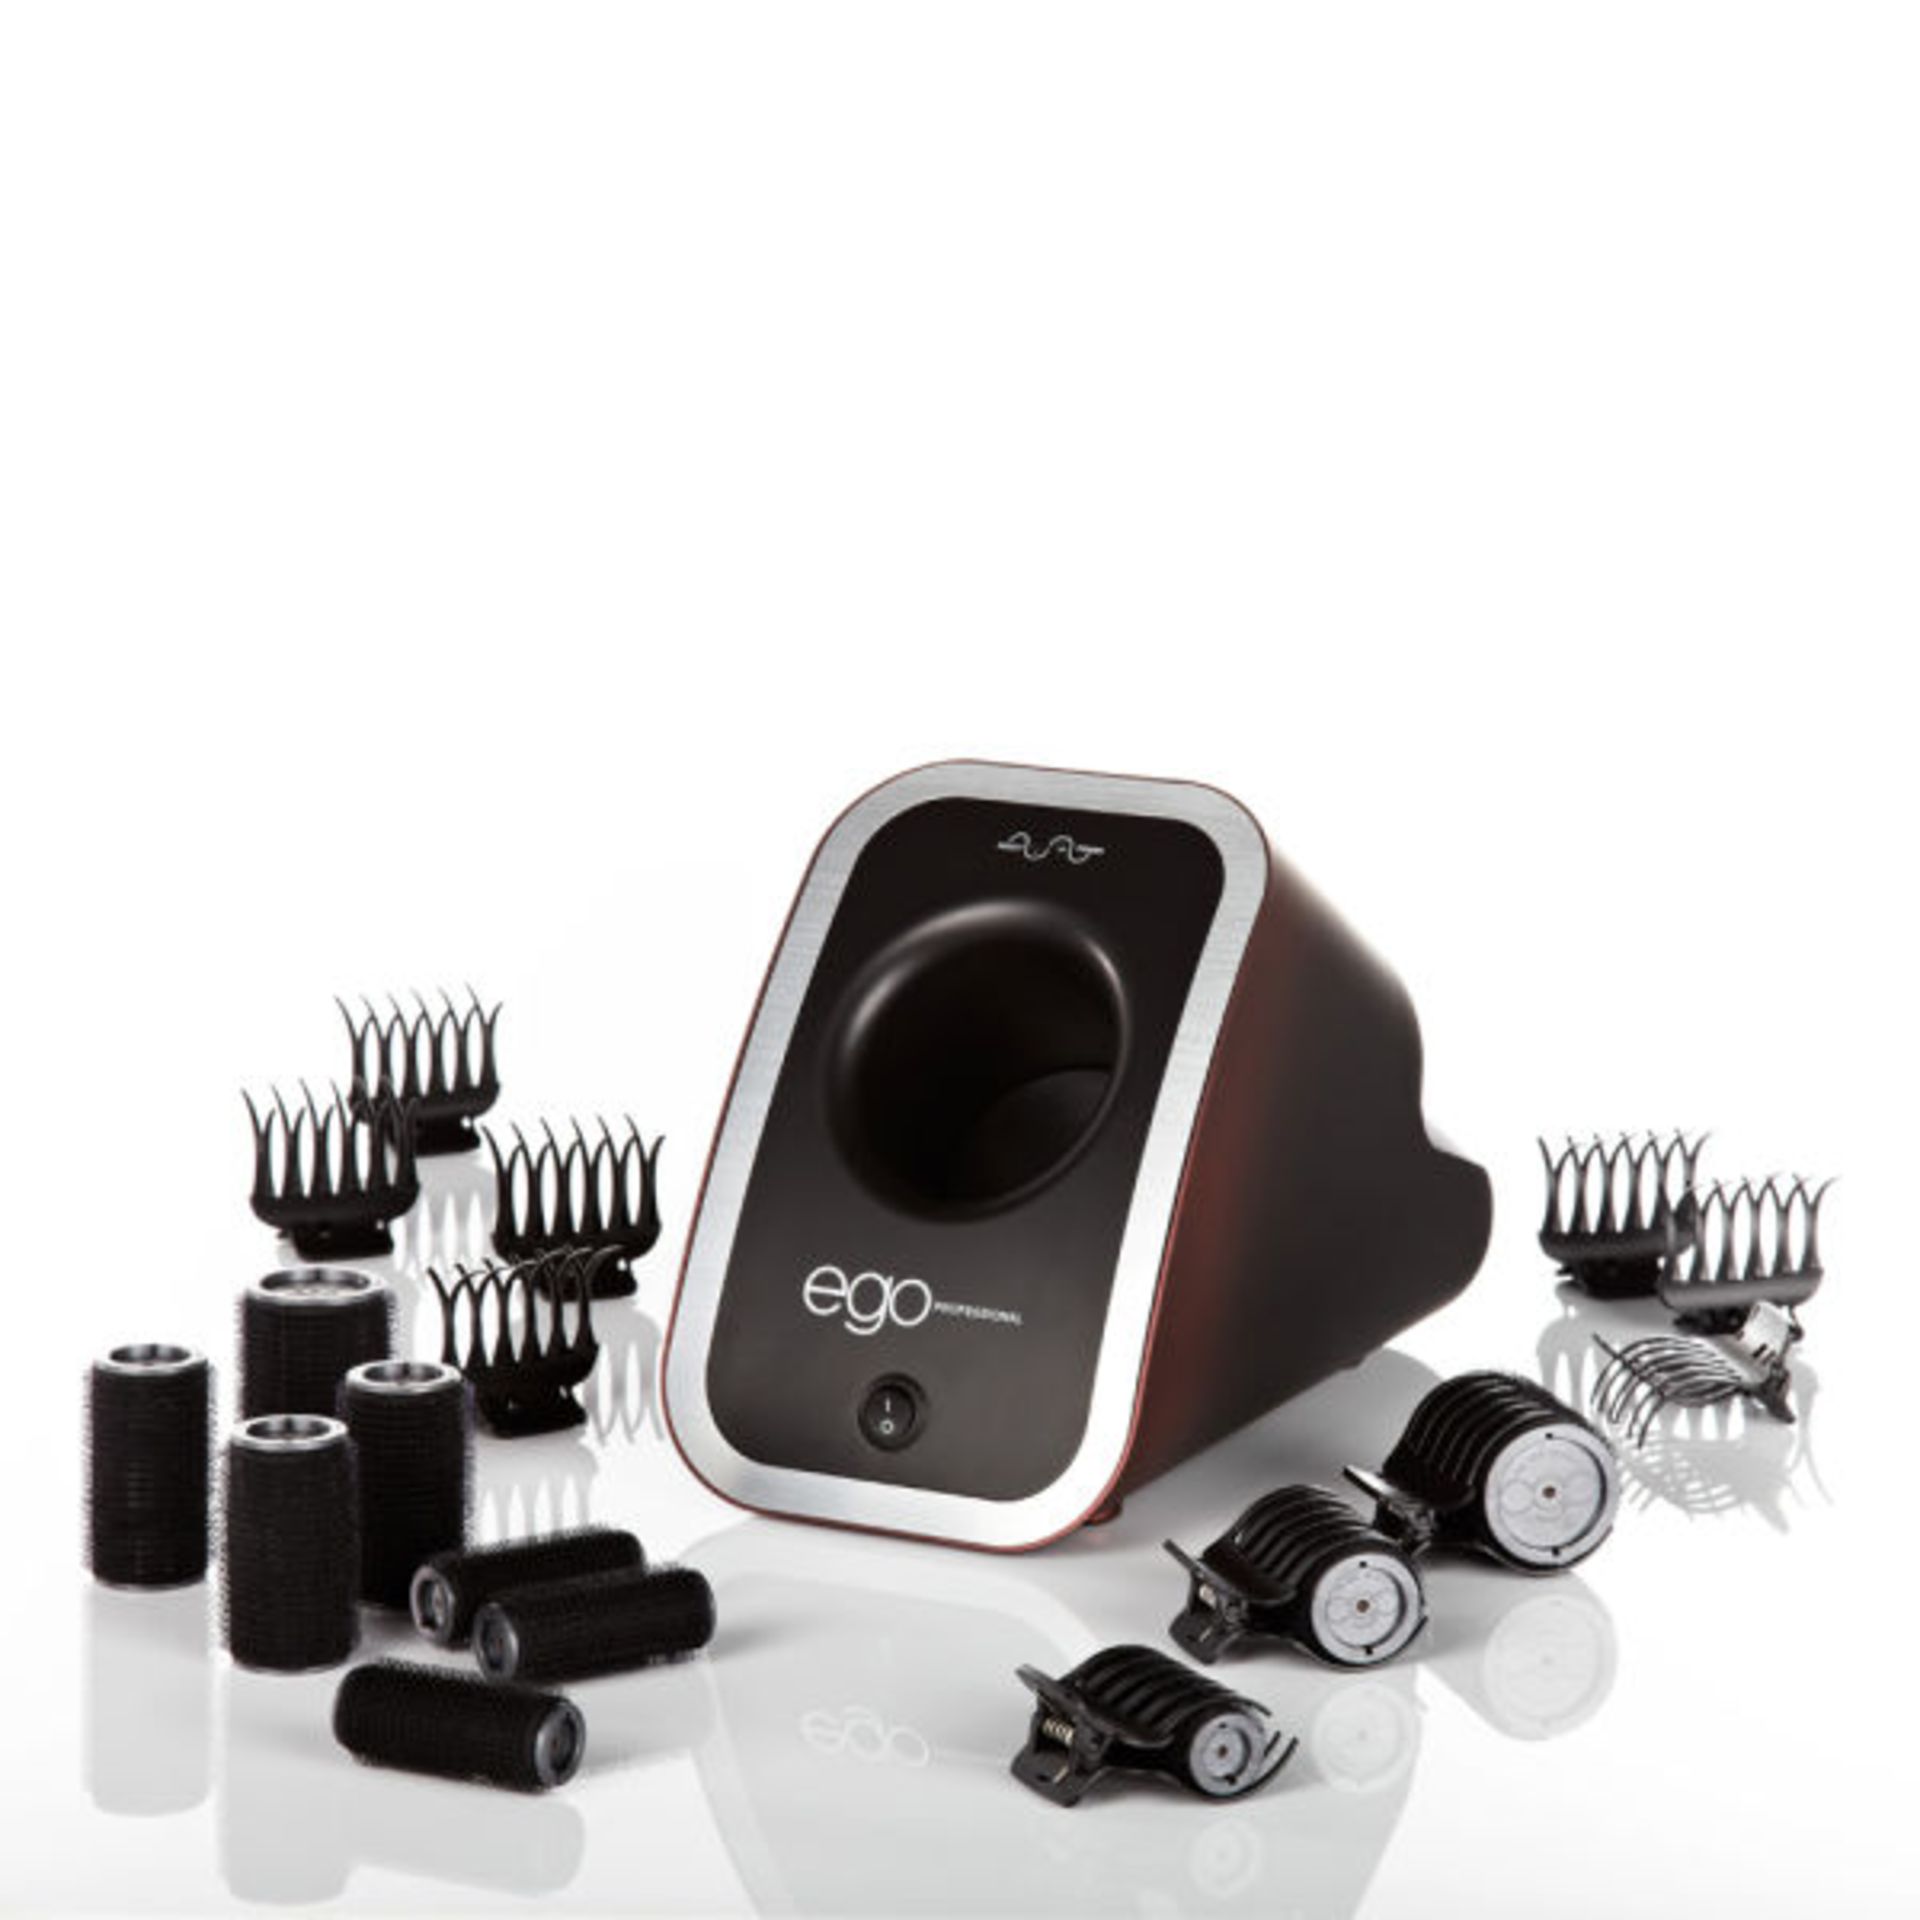 1 x Ego Professional Ego Boost Set (Boost Pod, 10 Rollers And 10 Clips) [Grade A] - Image 3 of 3